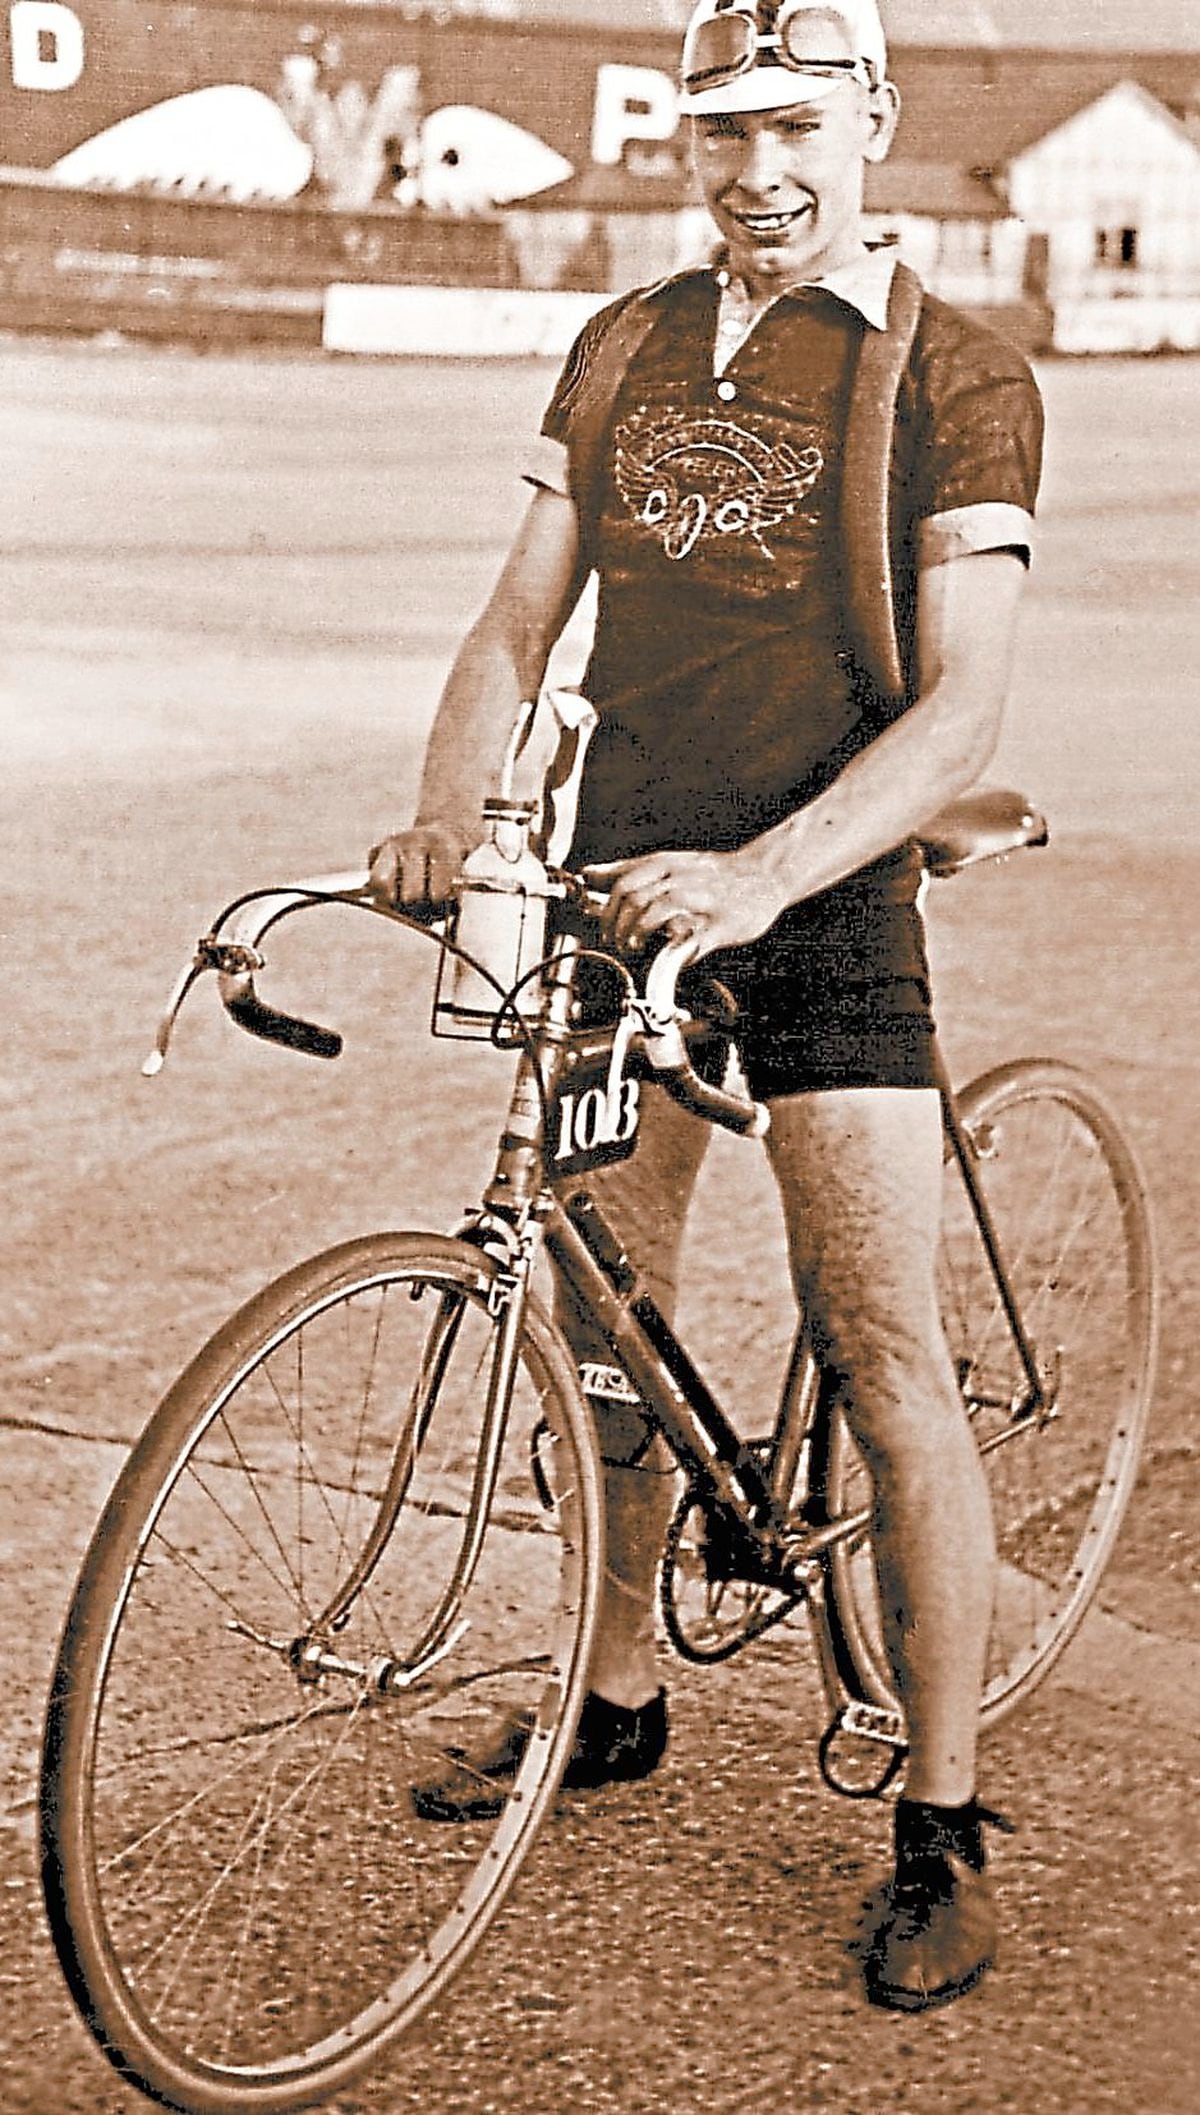 Percy Stallard in his cycle racing days – probably in the 1930’s.